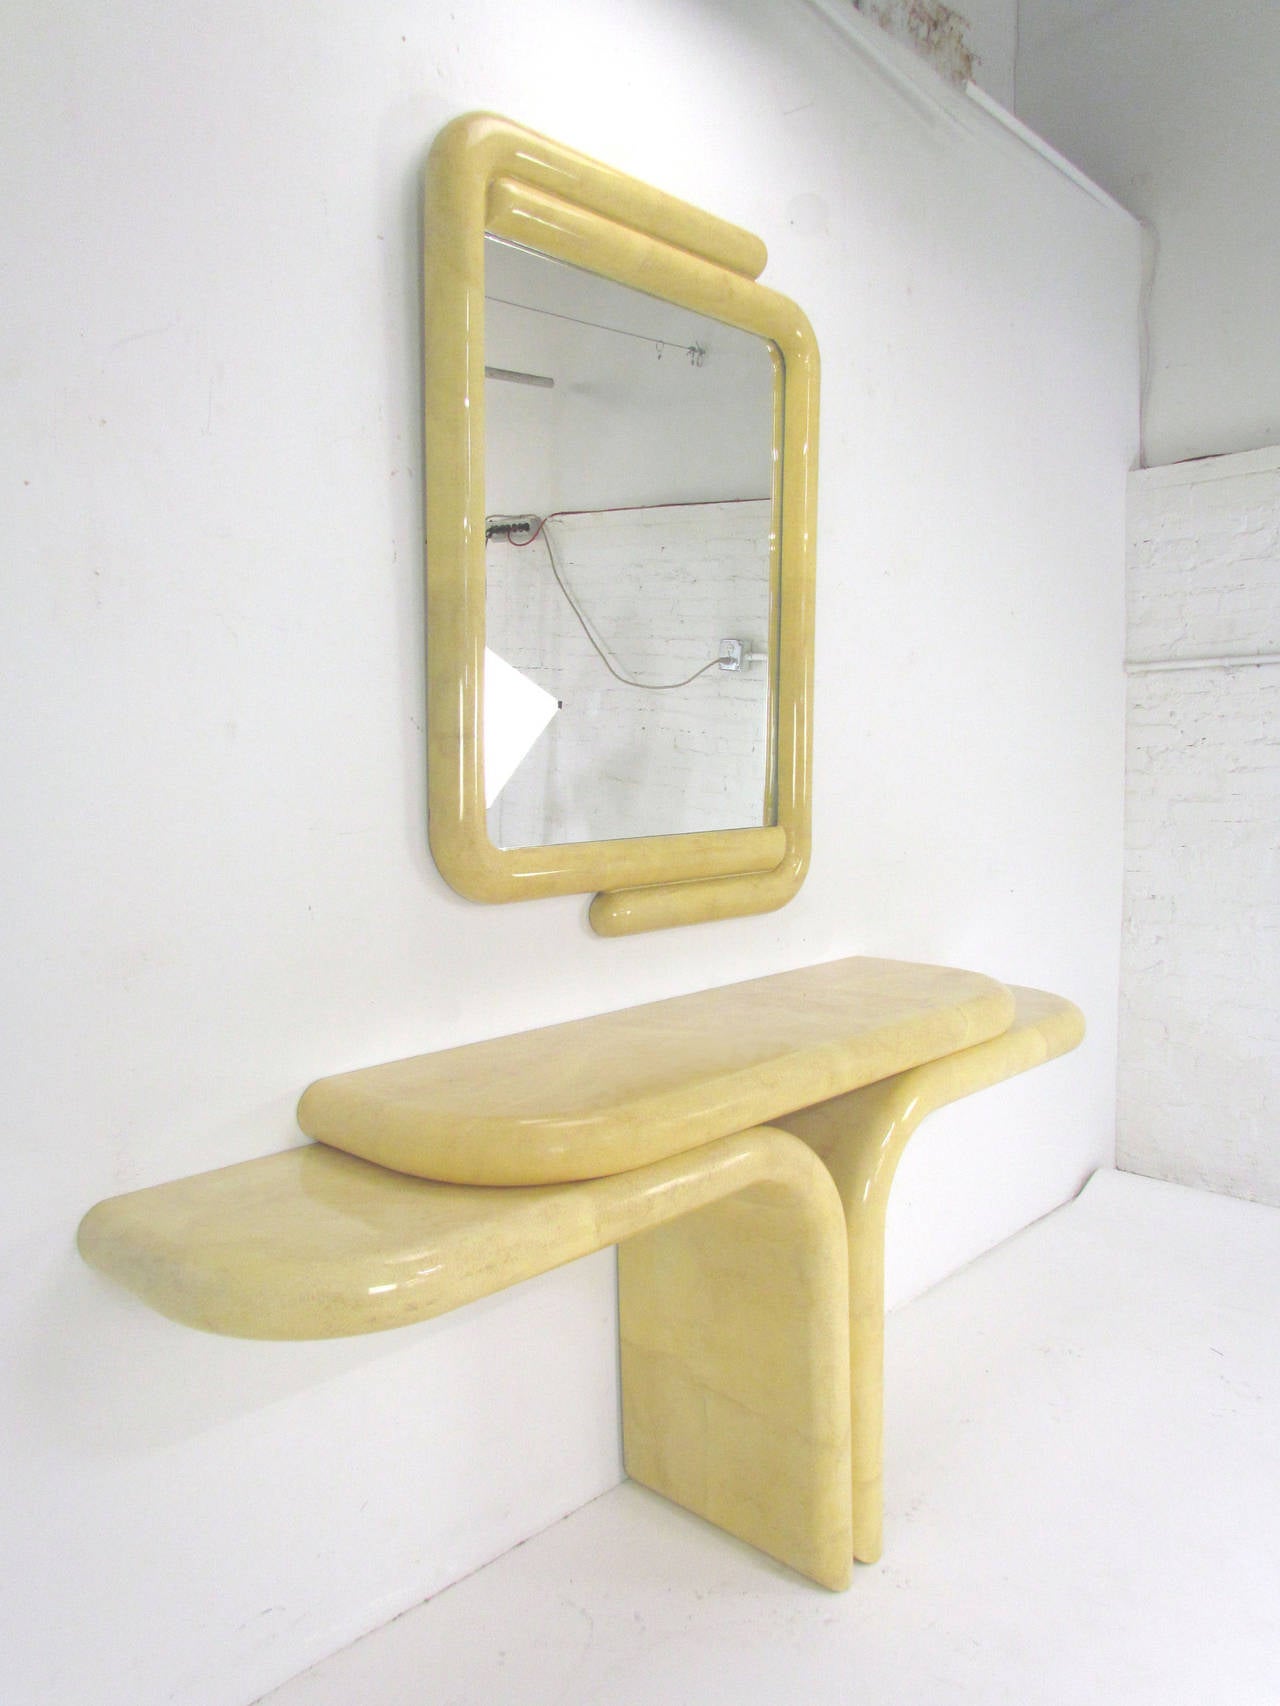 Sculptural console and mirror in the manner of Karl Springer. Lacquered in a faux goatskin finish, it features a counter balanced two-tiered table (with wall brackets for support) and a matching mirror that echoes its sinuous lines.
Mirror can be